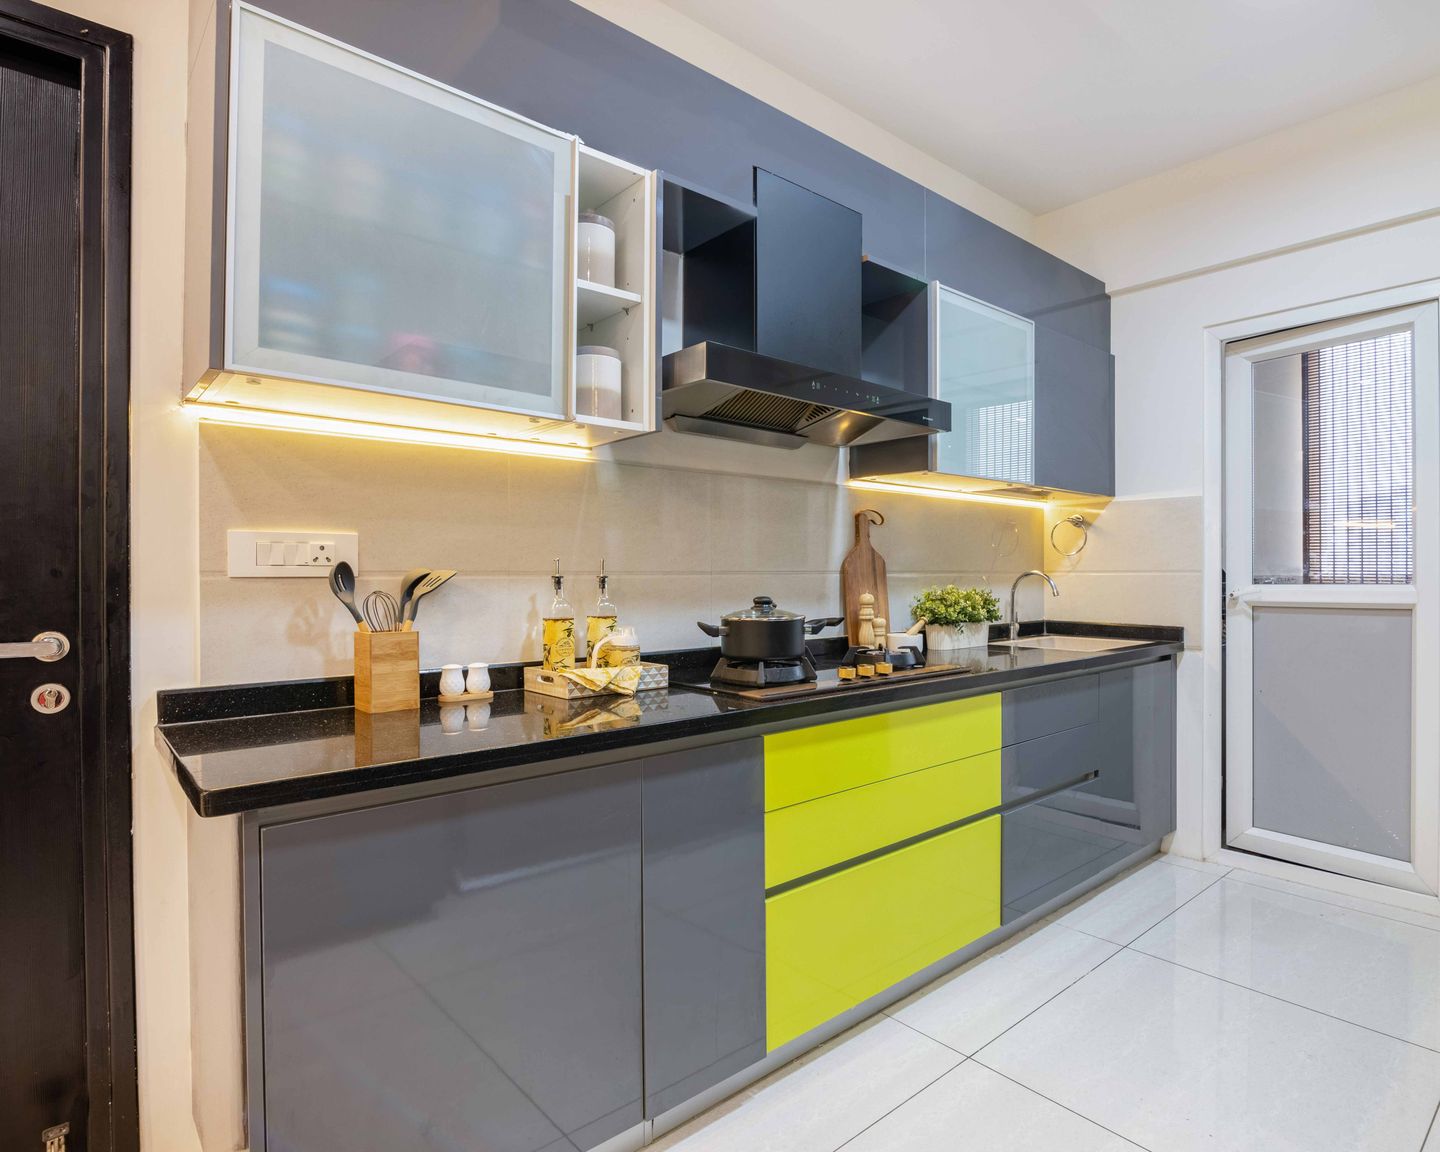 Modern Parallel Kitchen Design with Elegant Grey and Plankton Cabinets